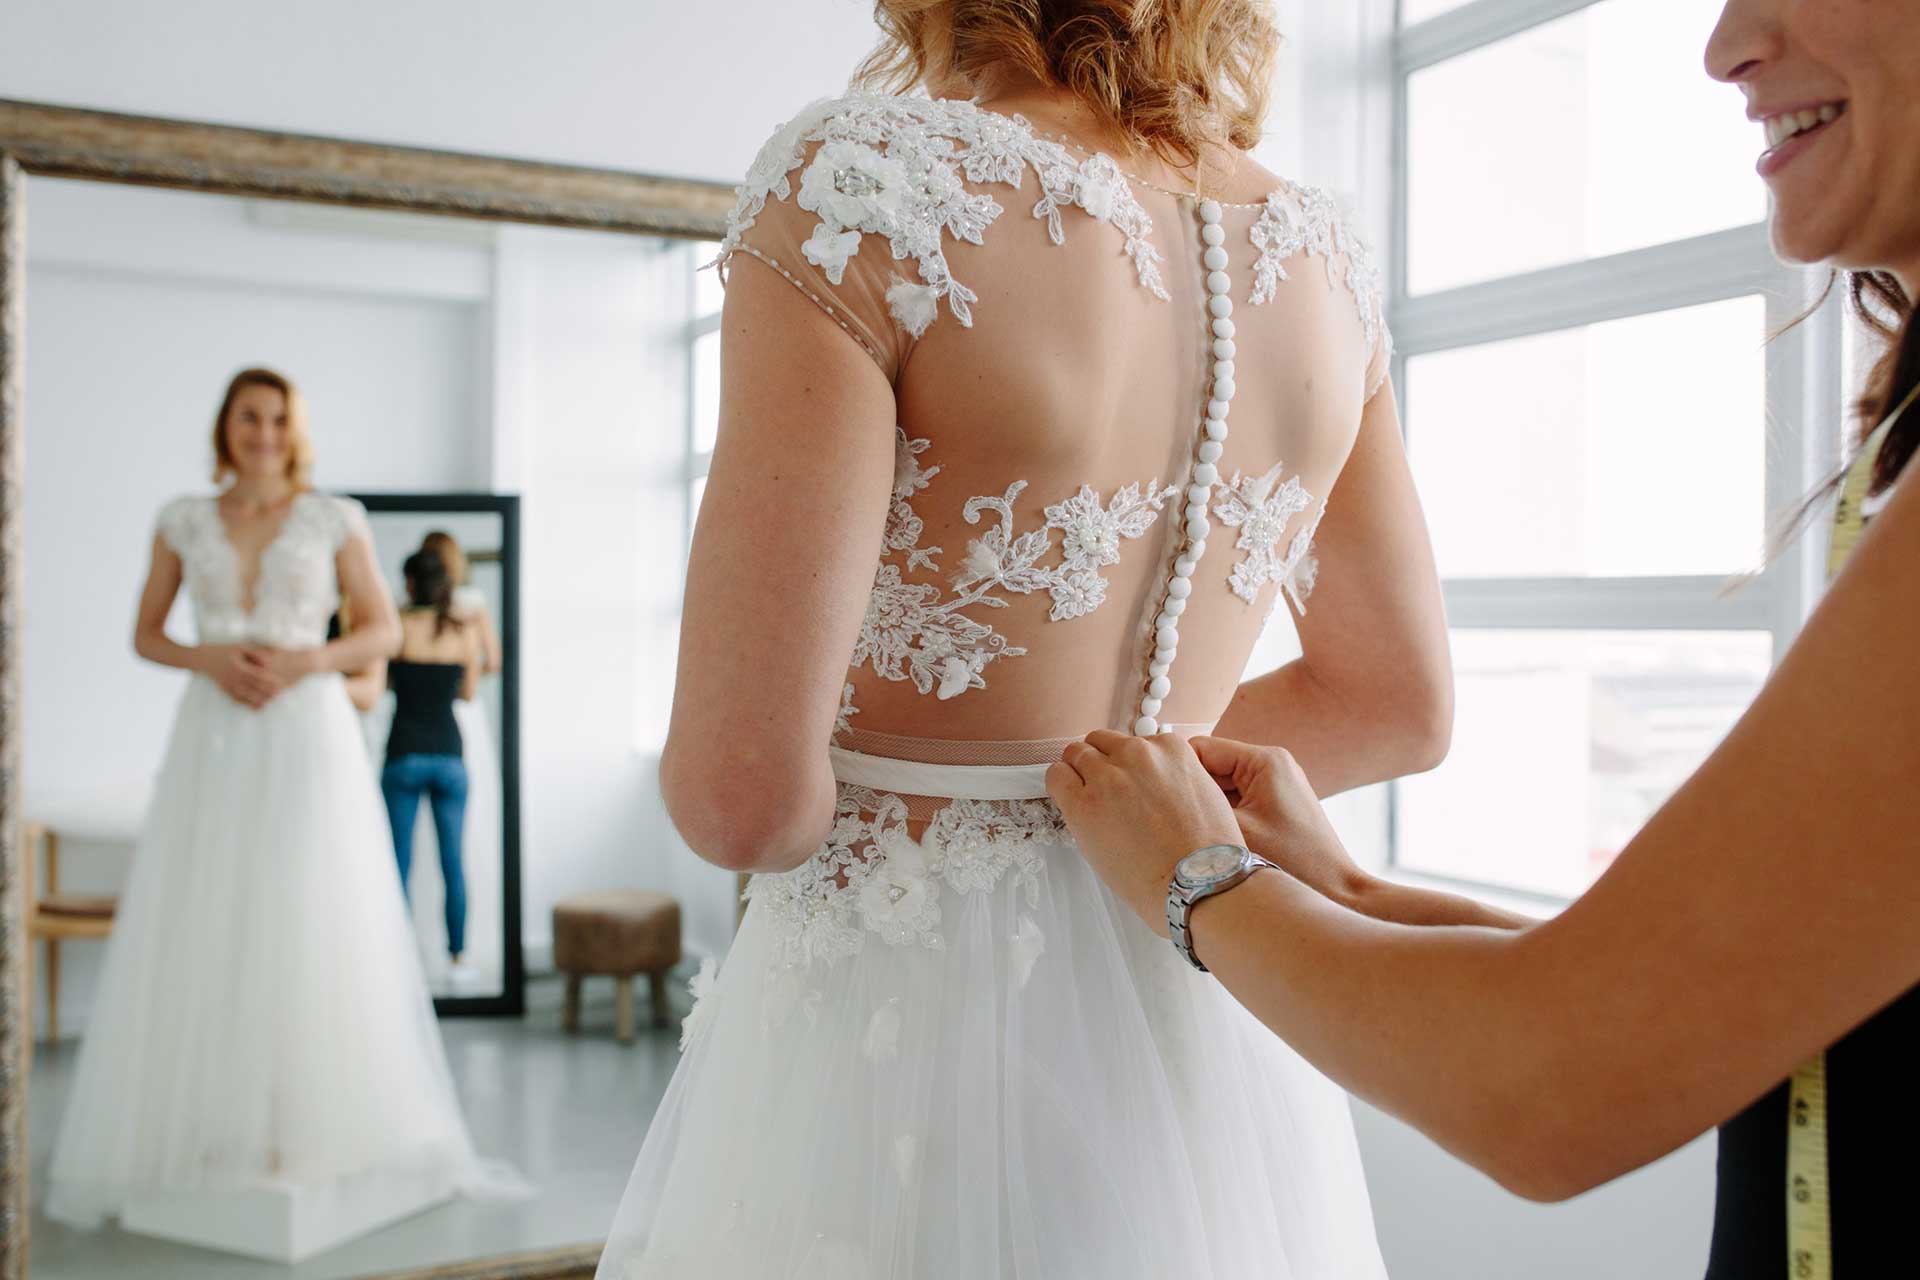 A woman is trying on a wedding dress in front of a mirror.